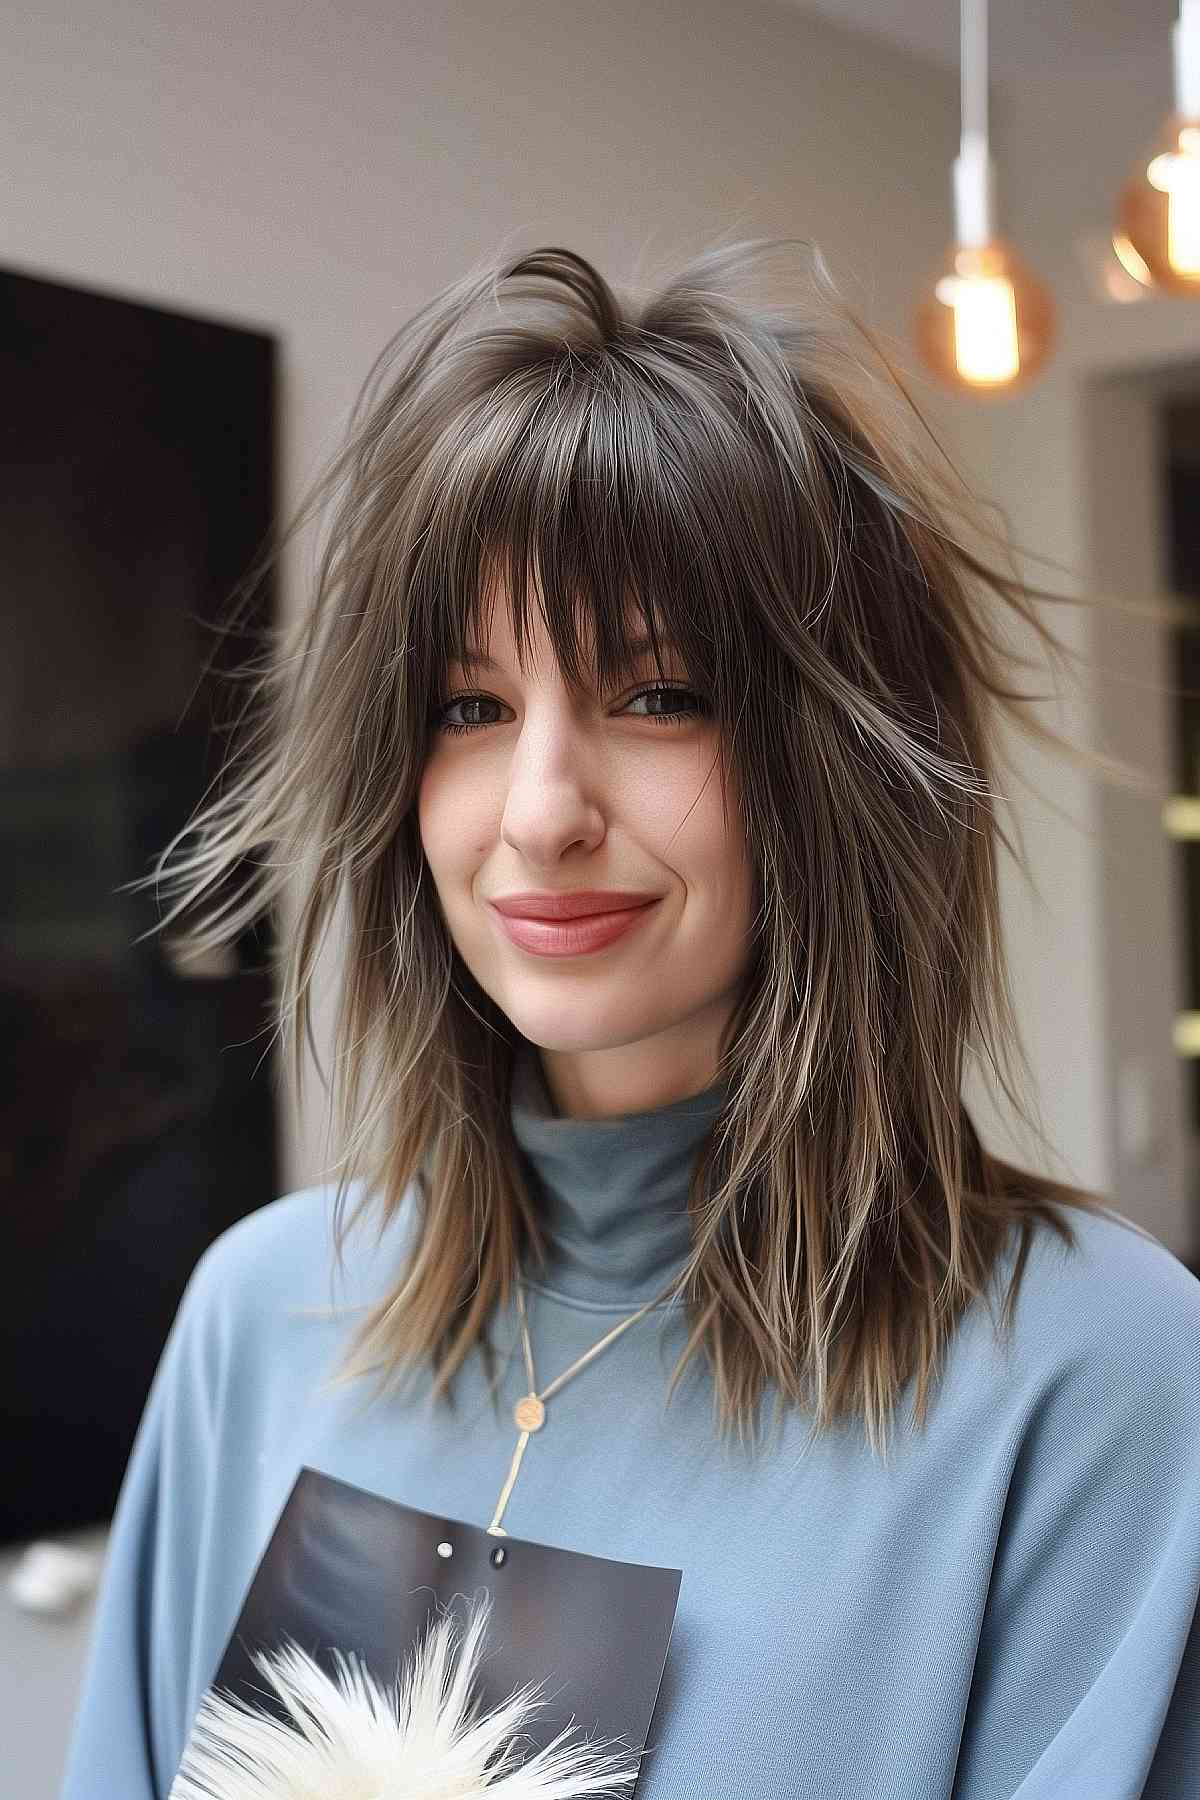 Smiling woman with a Wolf Cut styled for an oval face, featuring mid-length layers and a textured look.